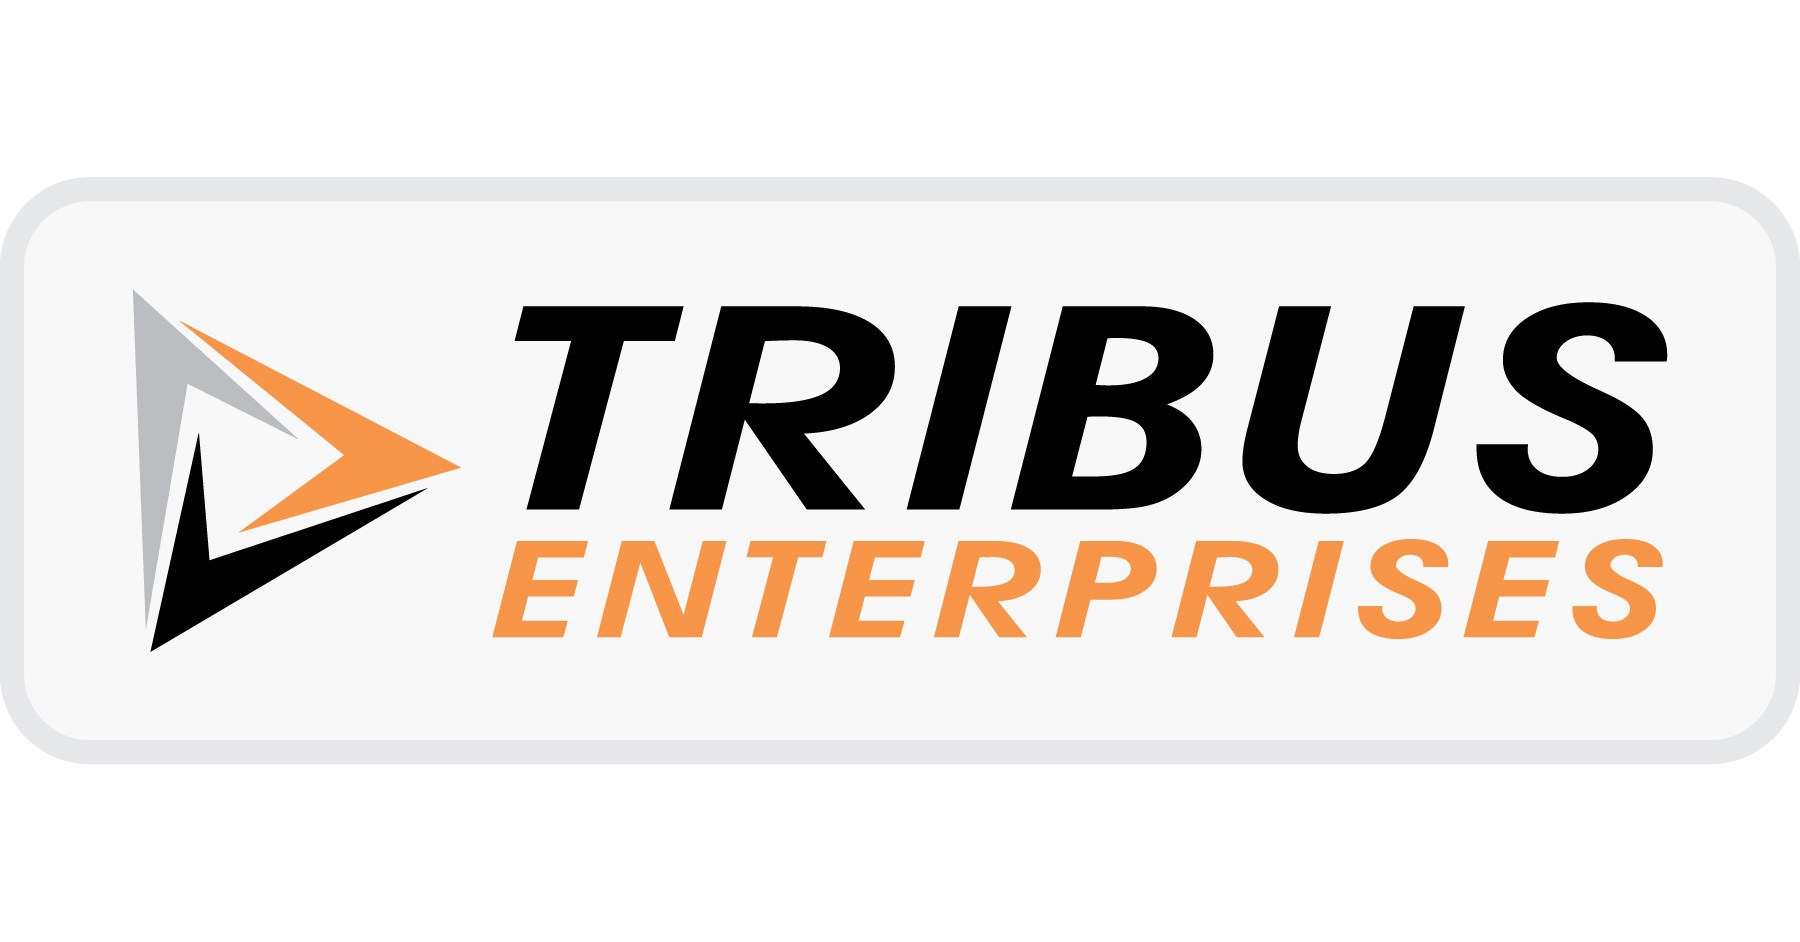 Tribus Enterprises In the Process of Seeking Funding to Start Manufacturing  Operations